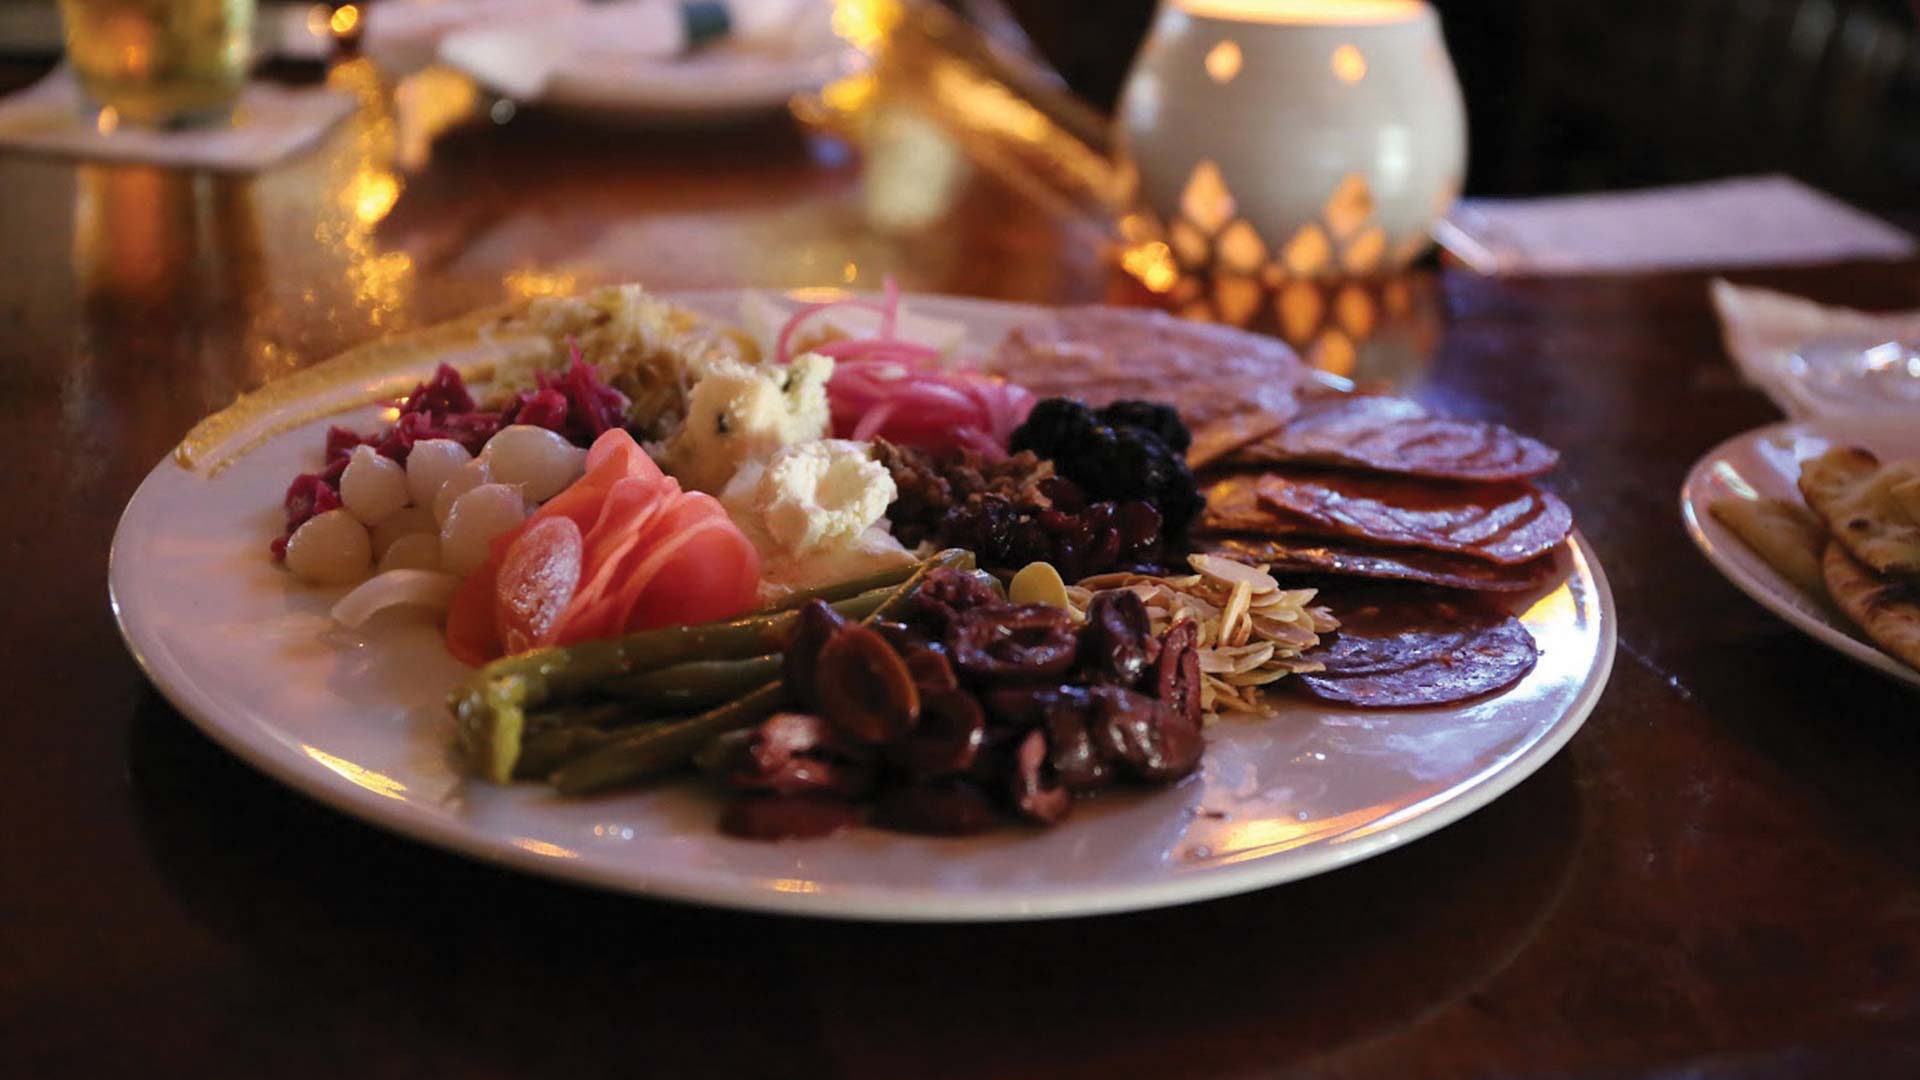 Winter Fun in Oneida County | Plated meal at Black Forest Pub & Grille